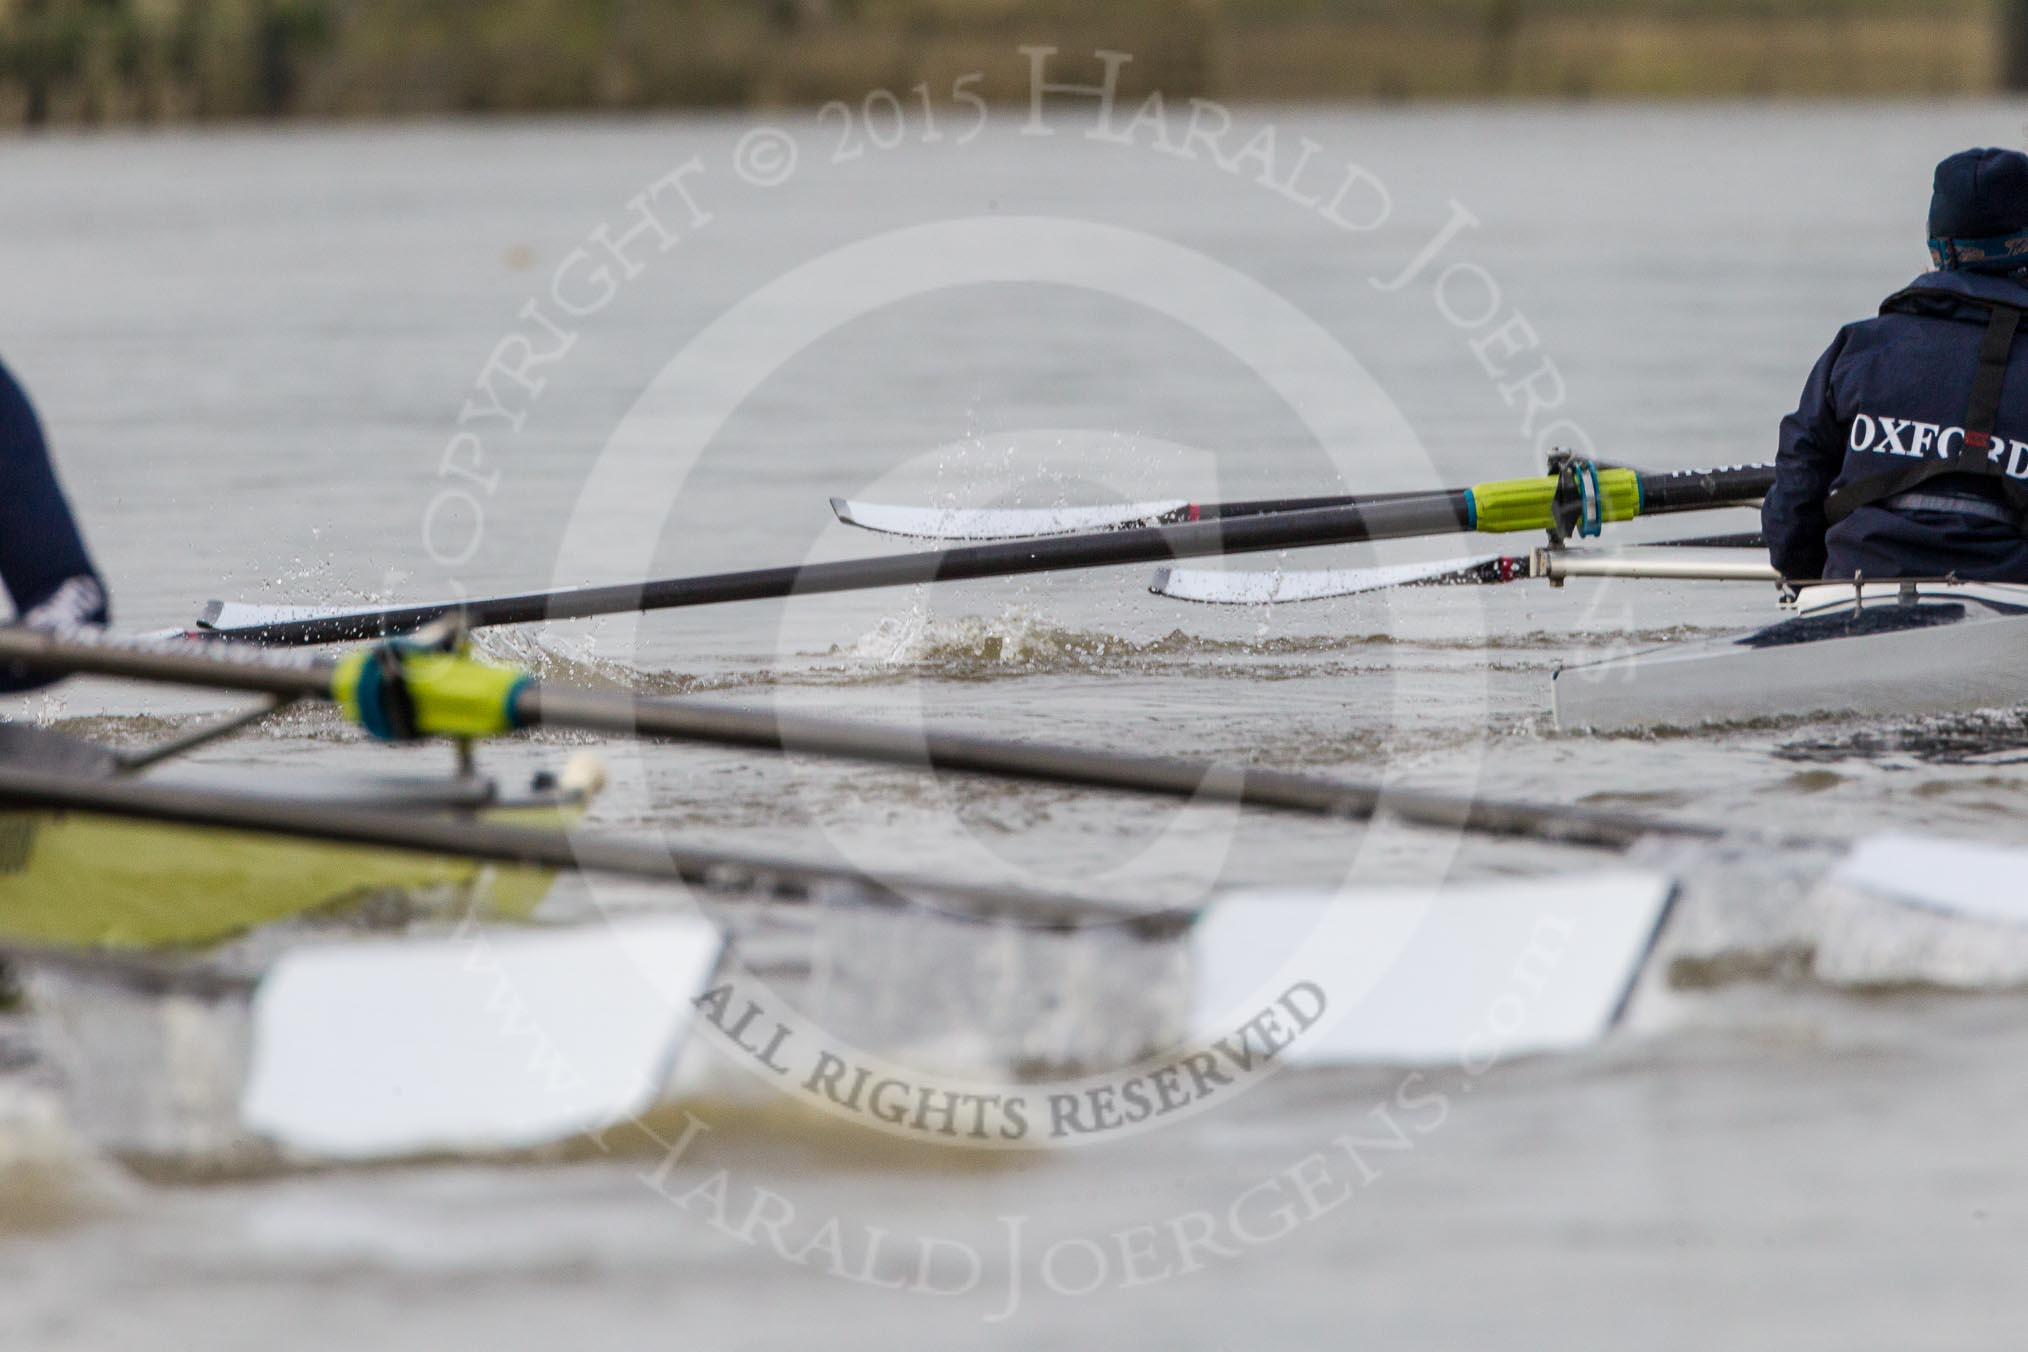 The Boat Race season 2016 - Women's Boat Race Trial Eights (OUWBC, Oxford): "Charybdis"  getting close to "Scylla" at the Surrey Bend.
River Thames between Putney Bridge and Mortlake,
London SW15,

United Kingdom,
on 10 December 2015 at 12:26, image #219